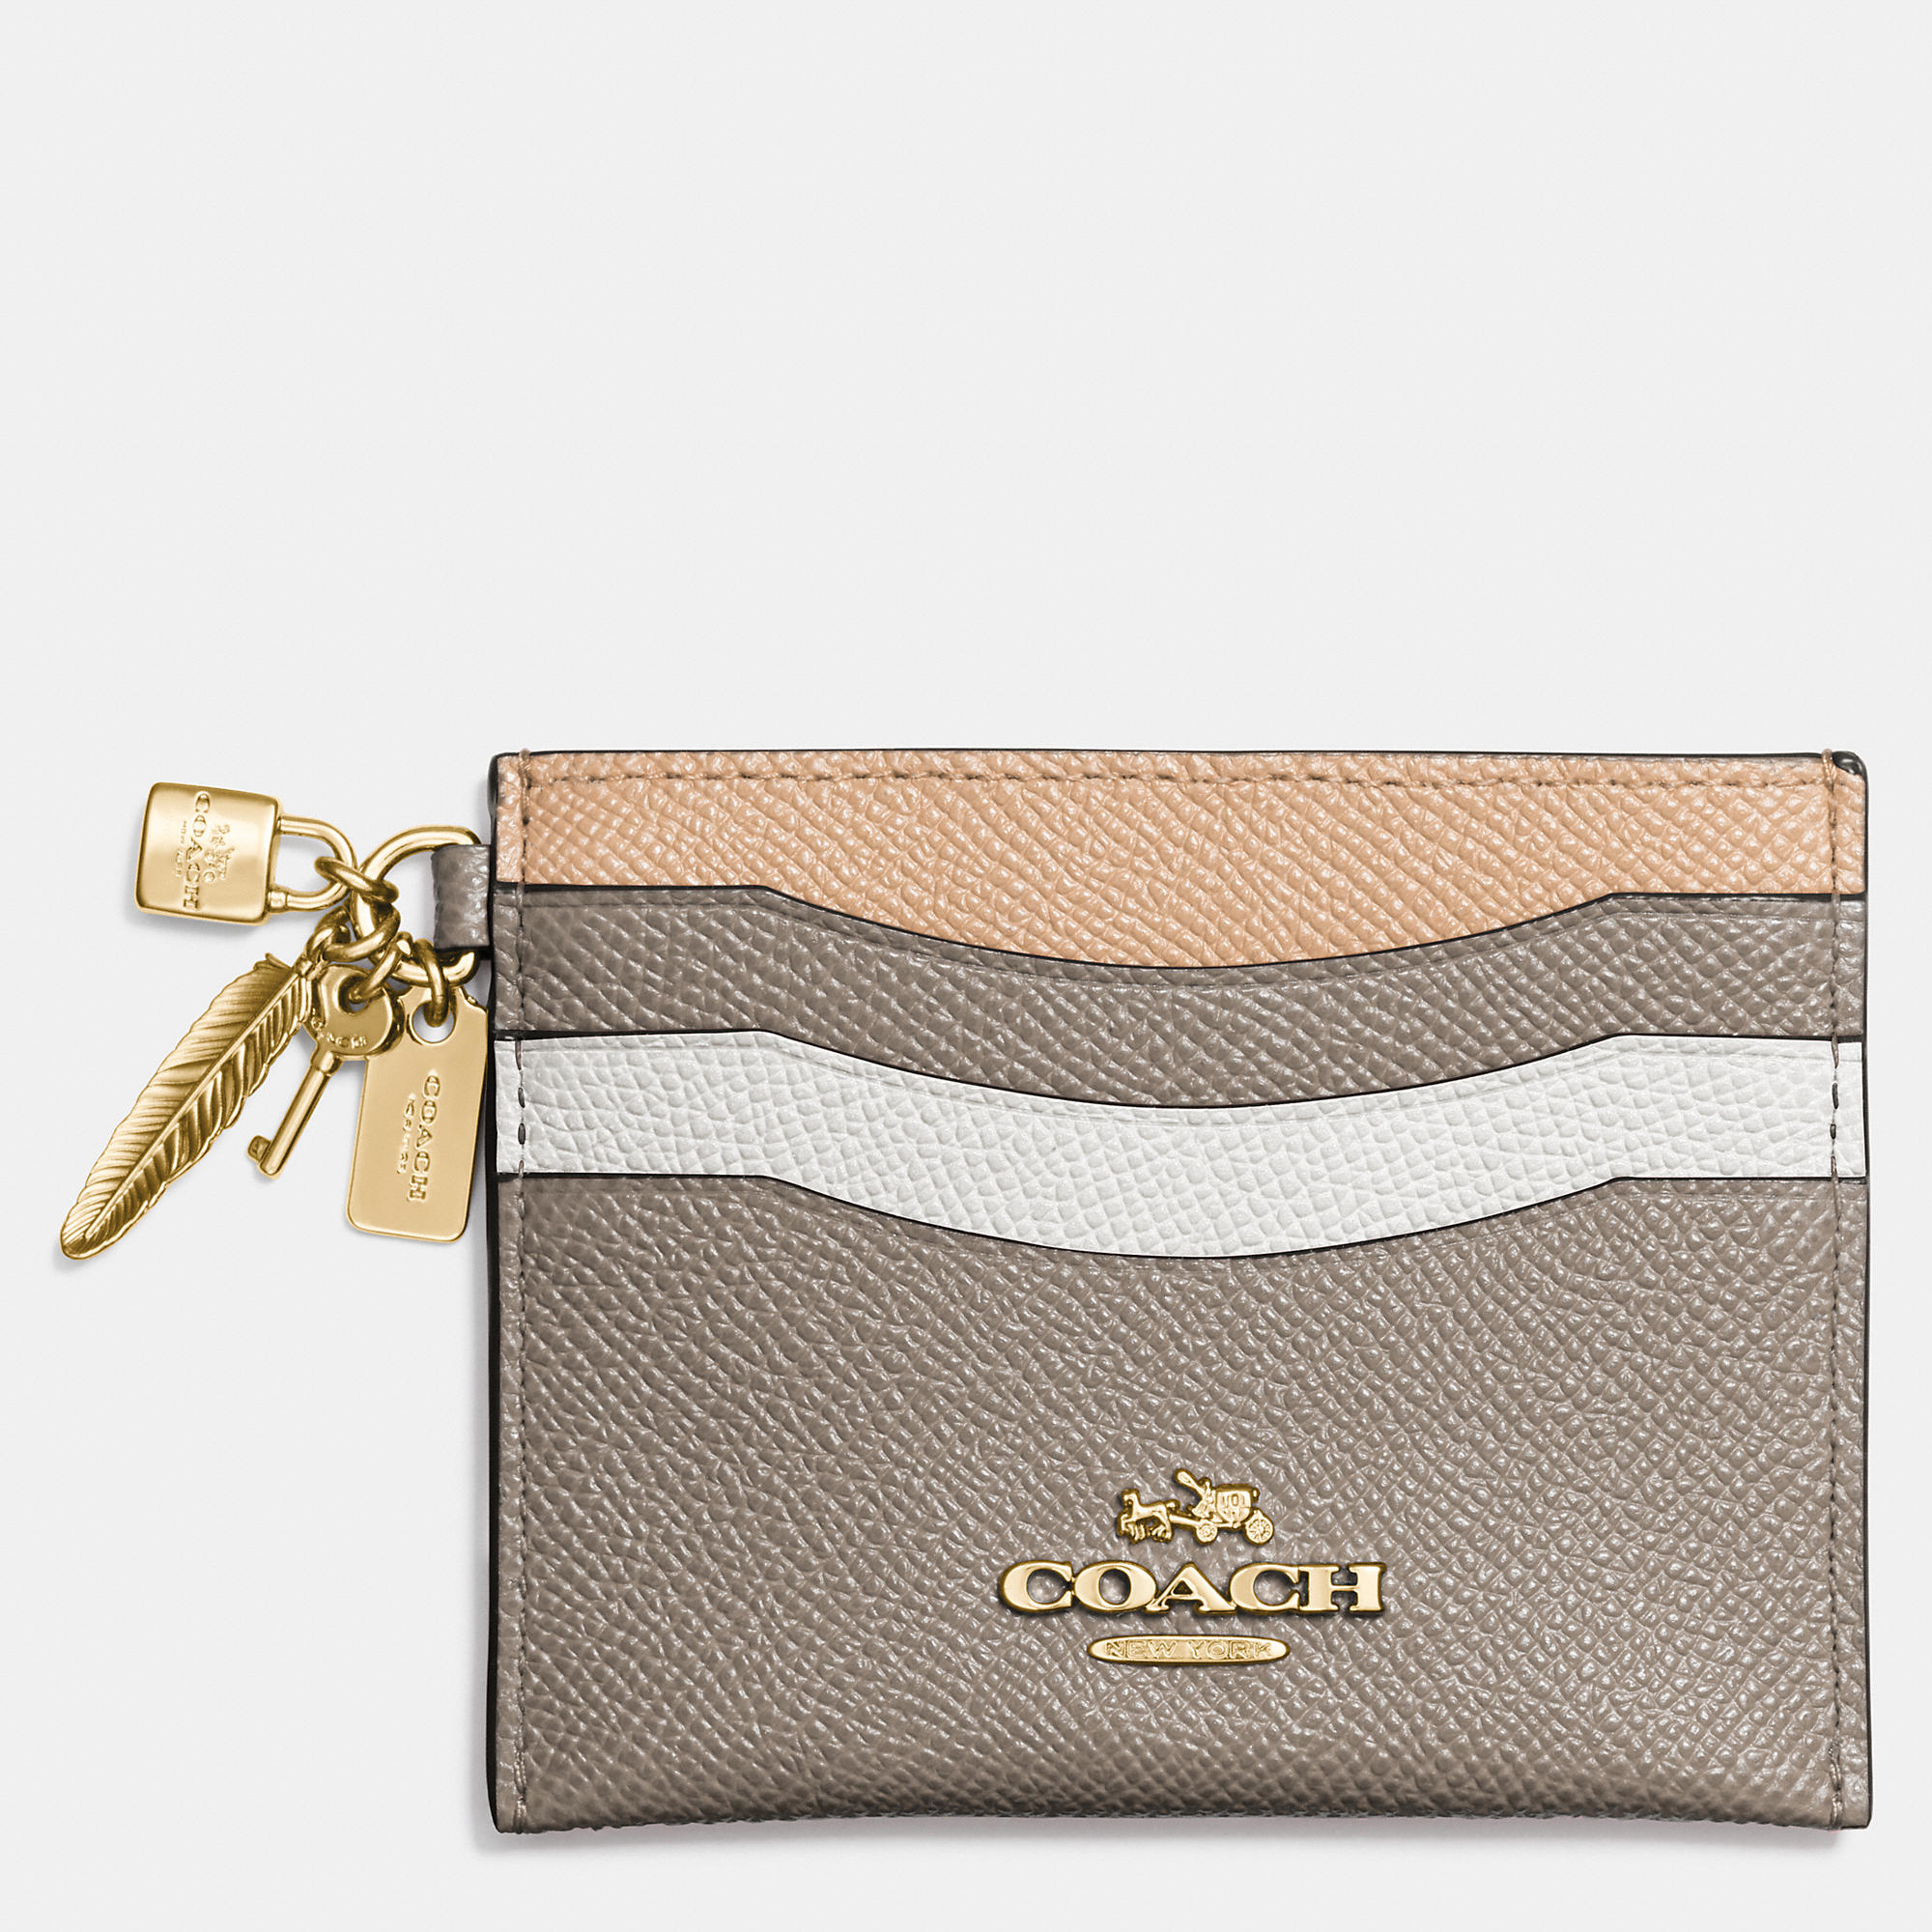 COACH Charm Flat Card Case In Colorblock Leather in Metallic | Lyst